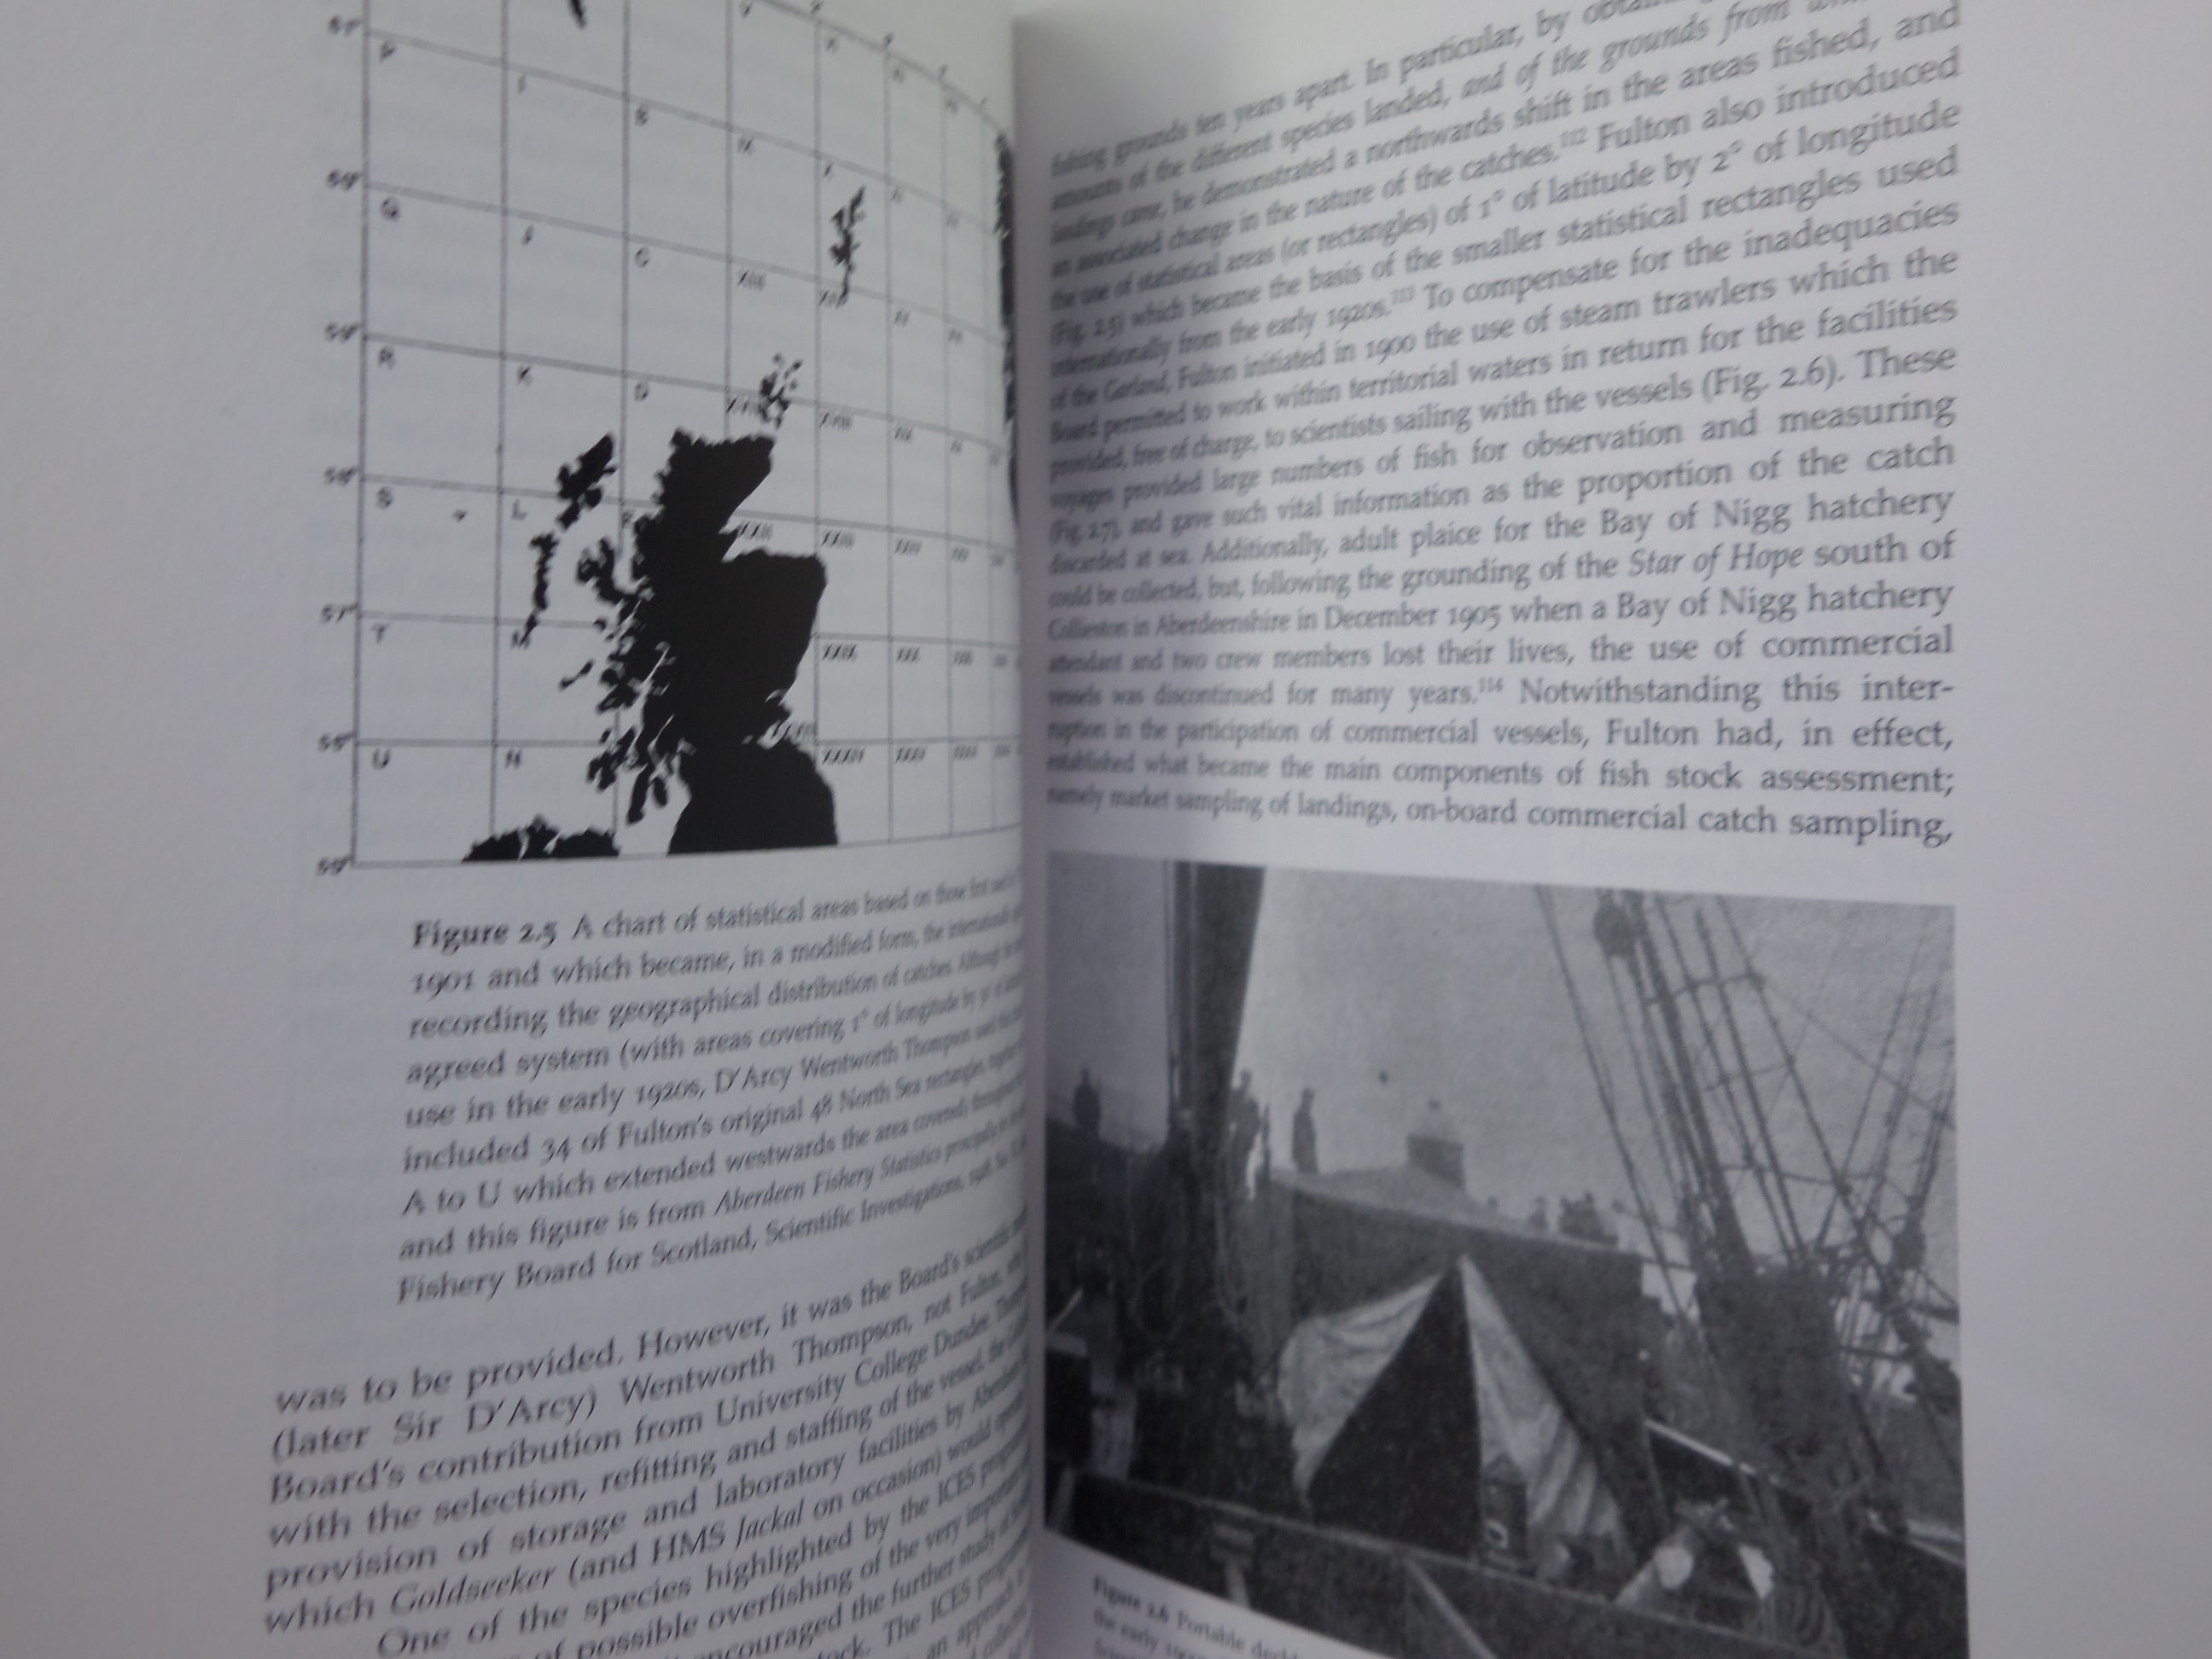 SCOTTISH LIFE & SOCIETY VOL 4: BOATS, FISHING & THE SEA 2008 JAMES COULL ET AL